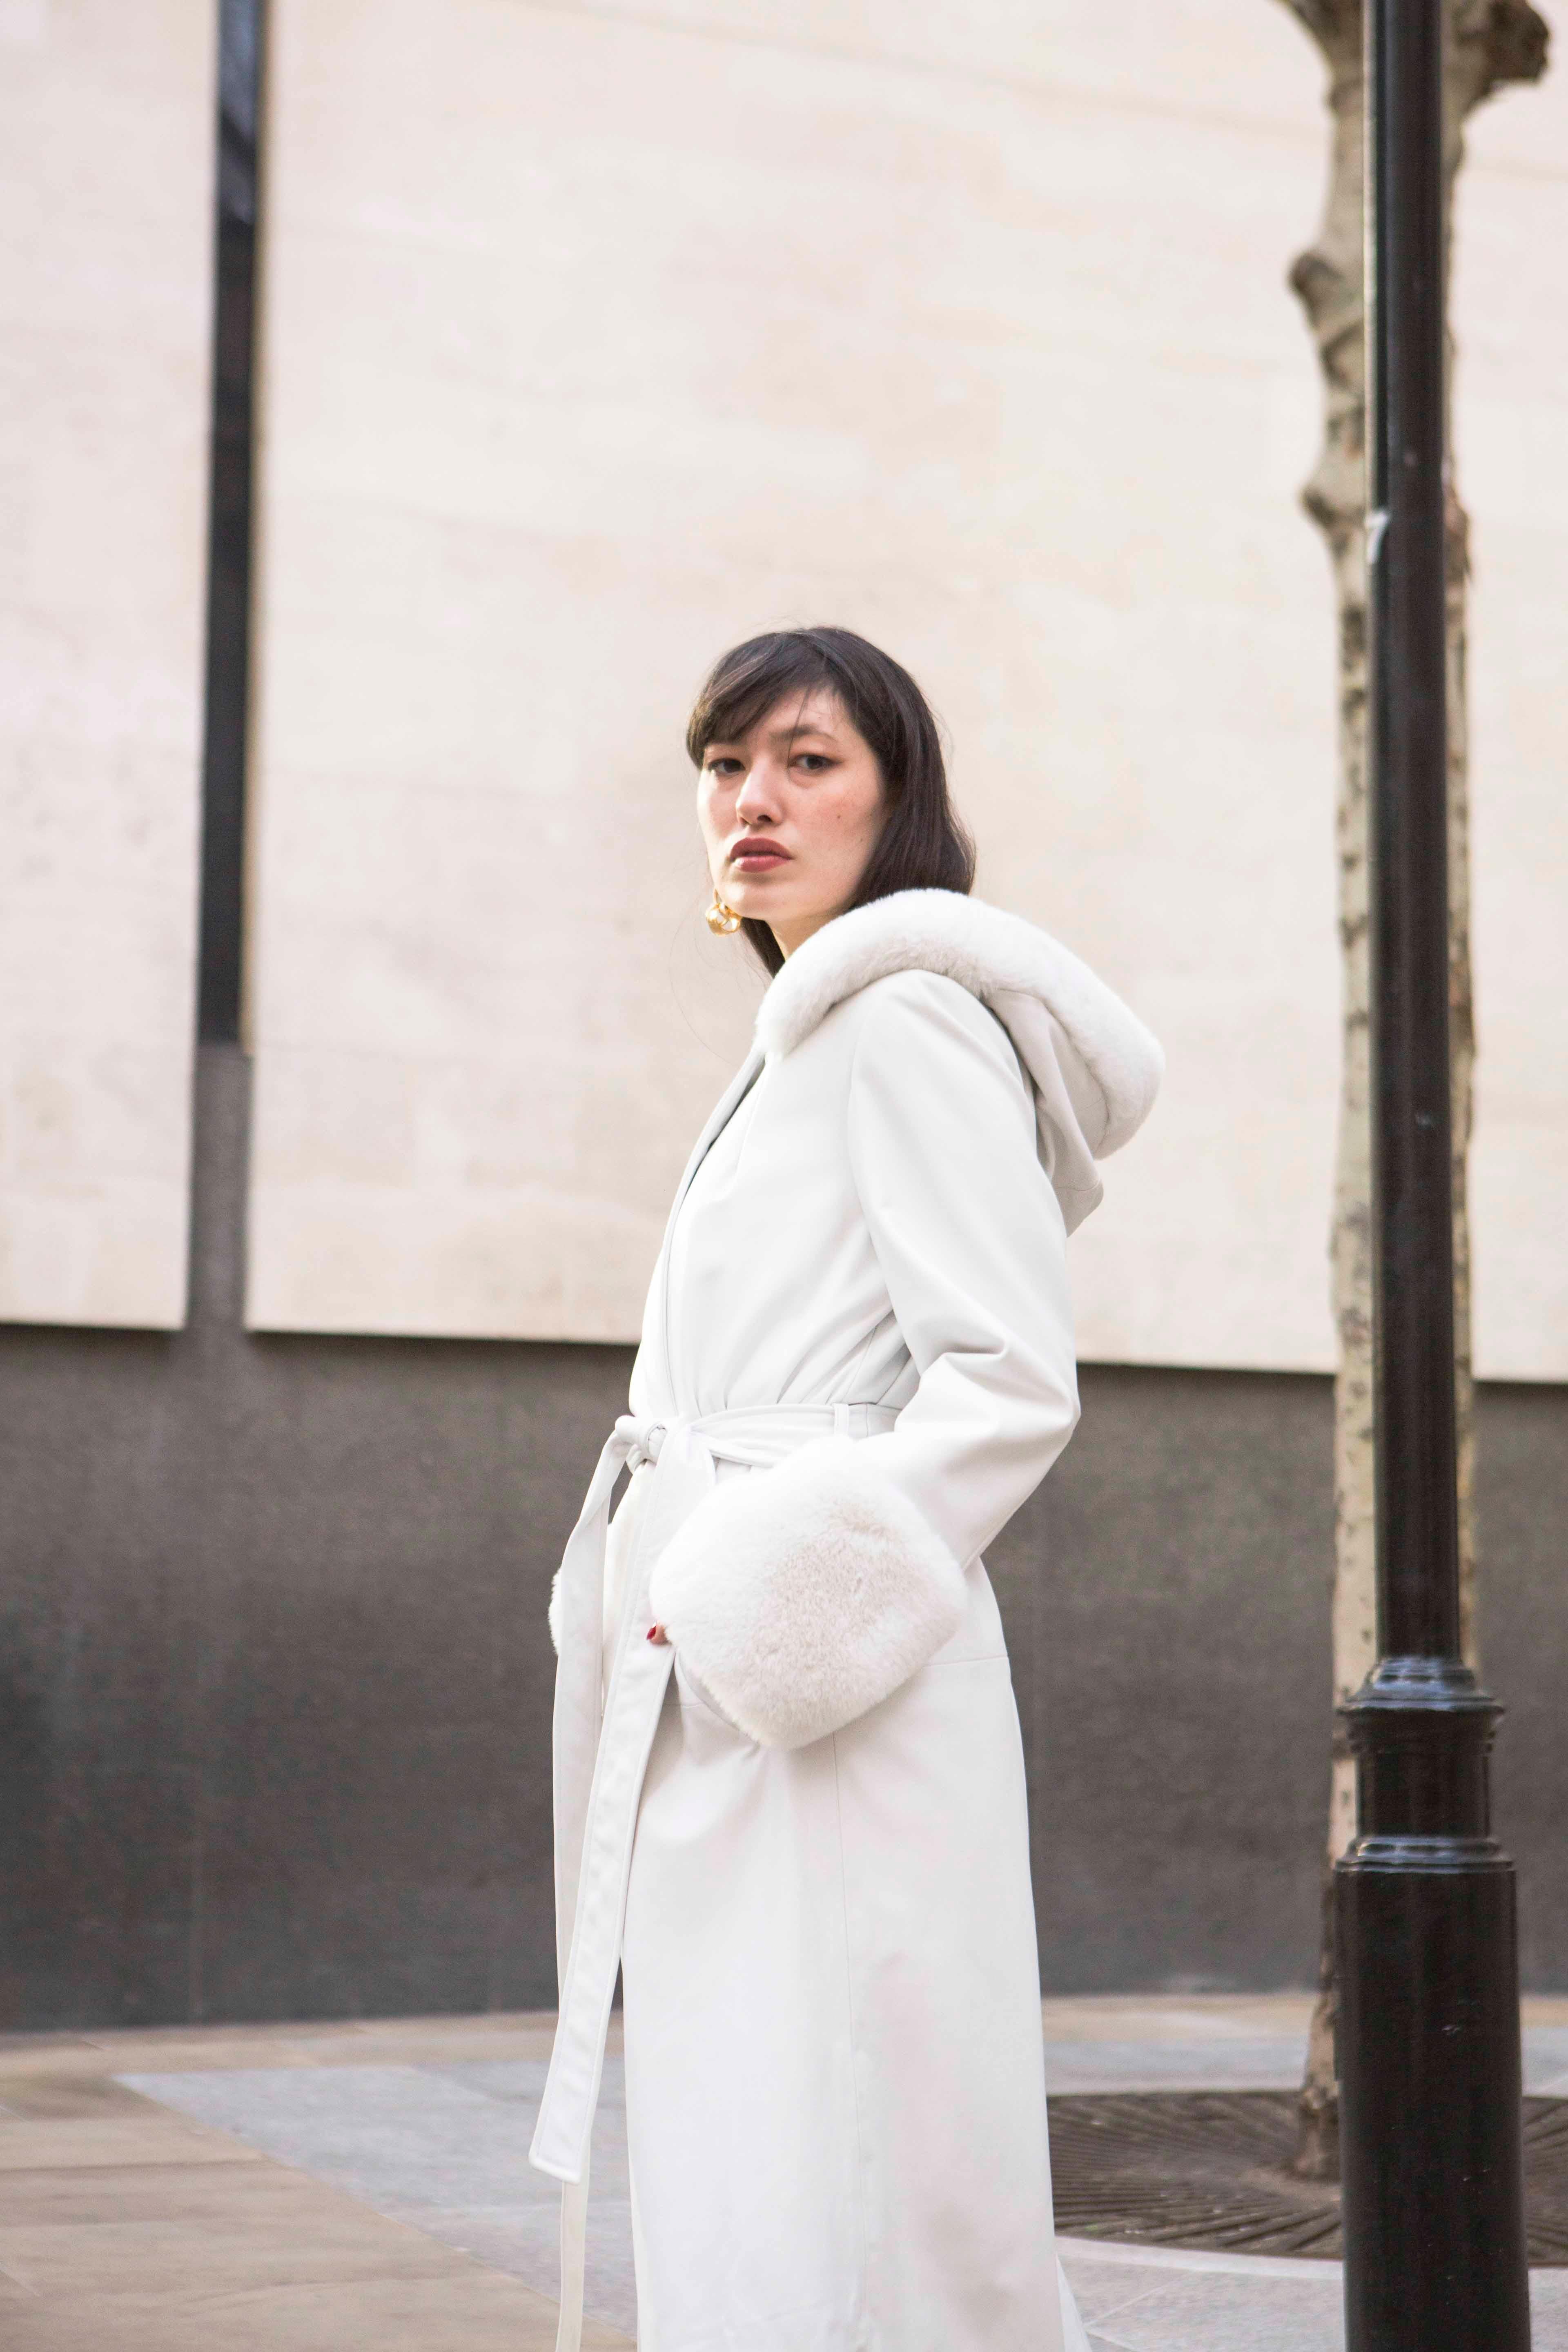 Verheyen London Hooded Leather Trench Coat in White with Faux Fur - Size uk 10

Handmade in London, made with 100% Italian Lambs Leather and the highest quality of faux fur to match, this luxury item is an investment piece to wear for a lifetime. 